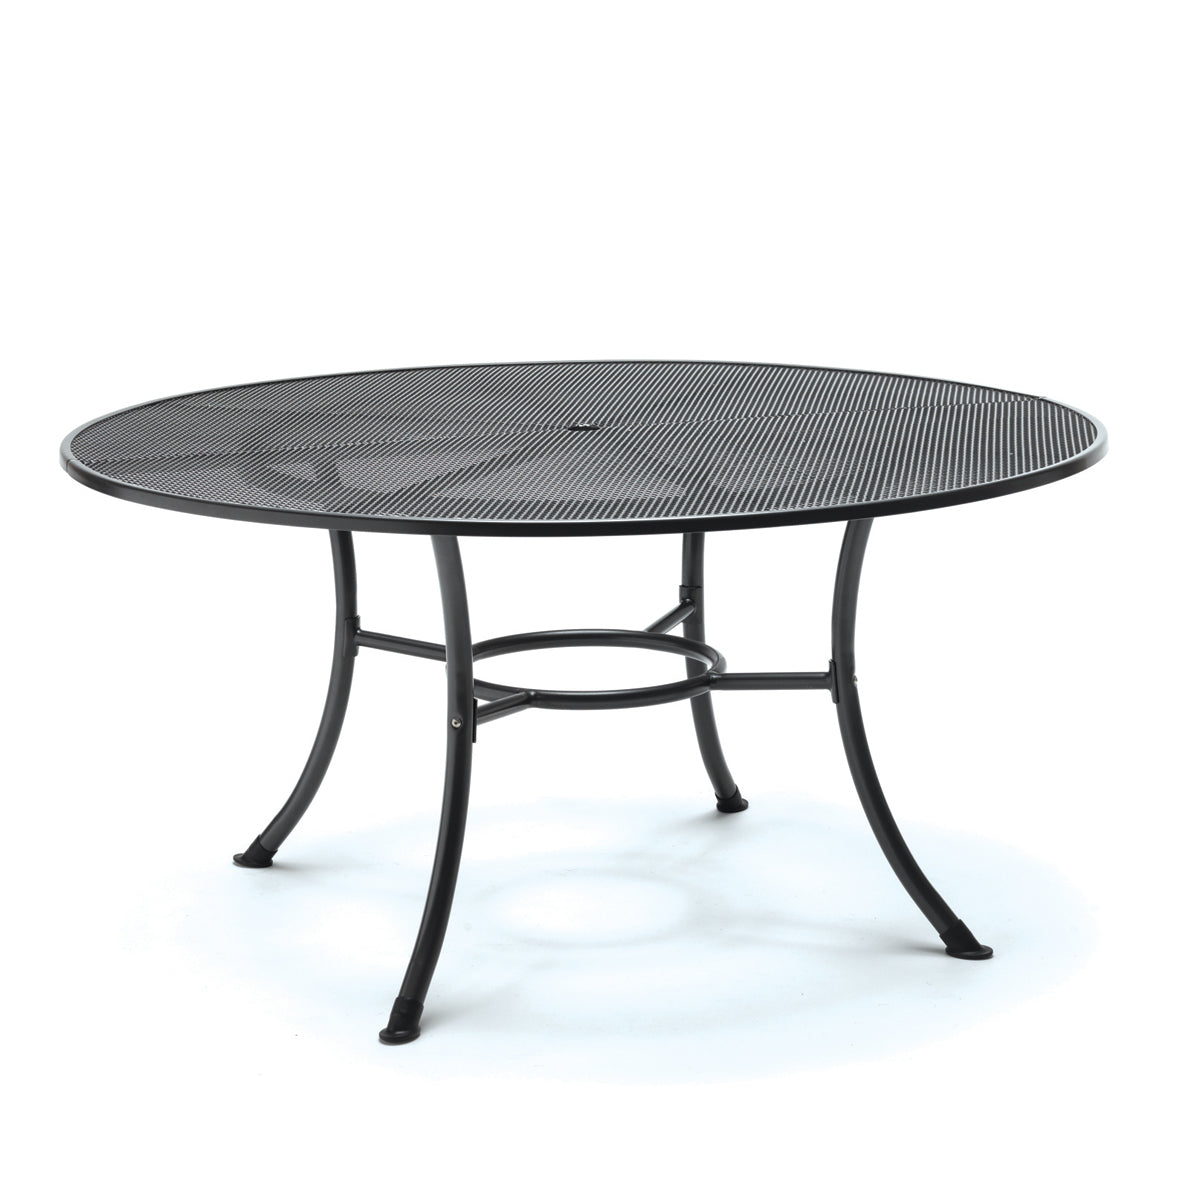 60" Round Mesh Top Table